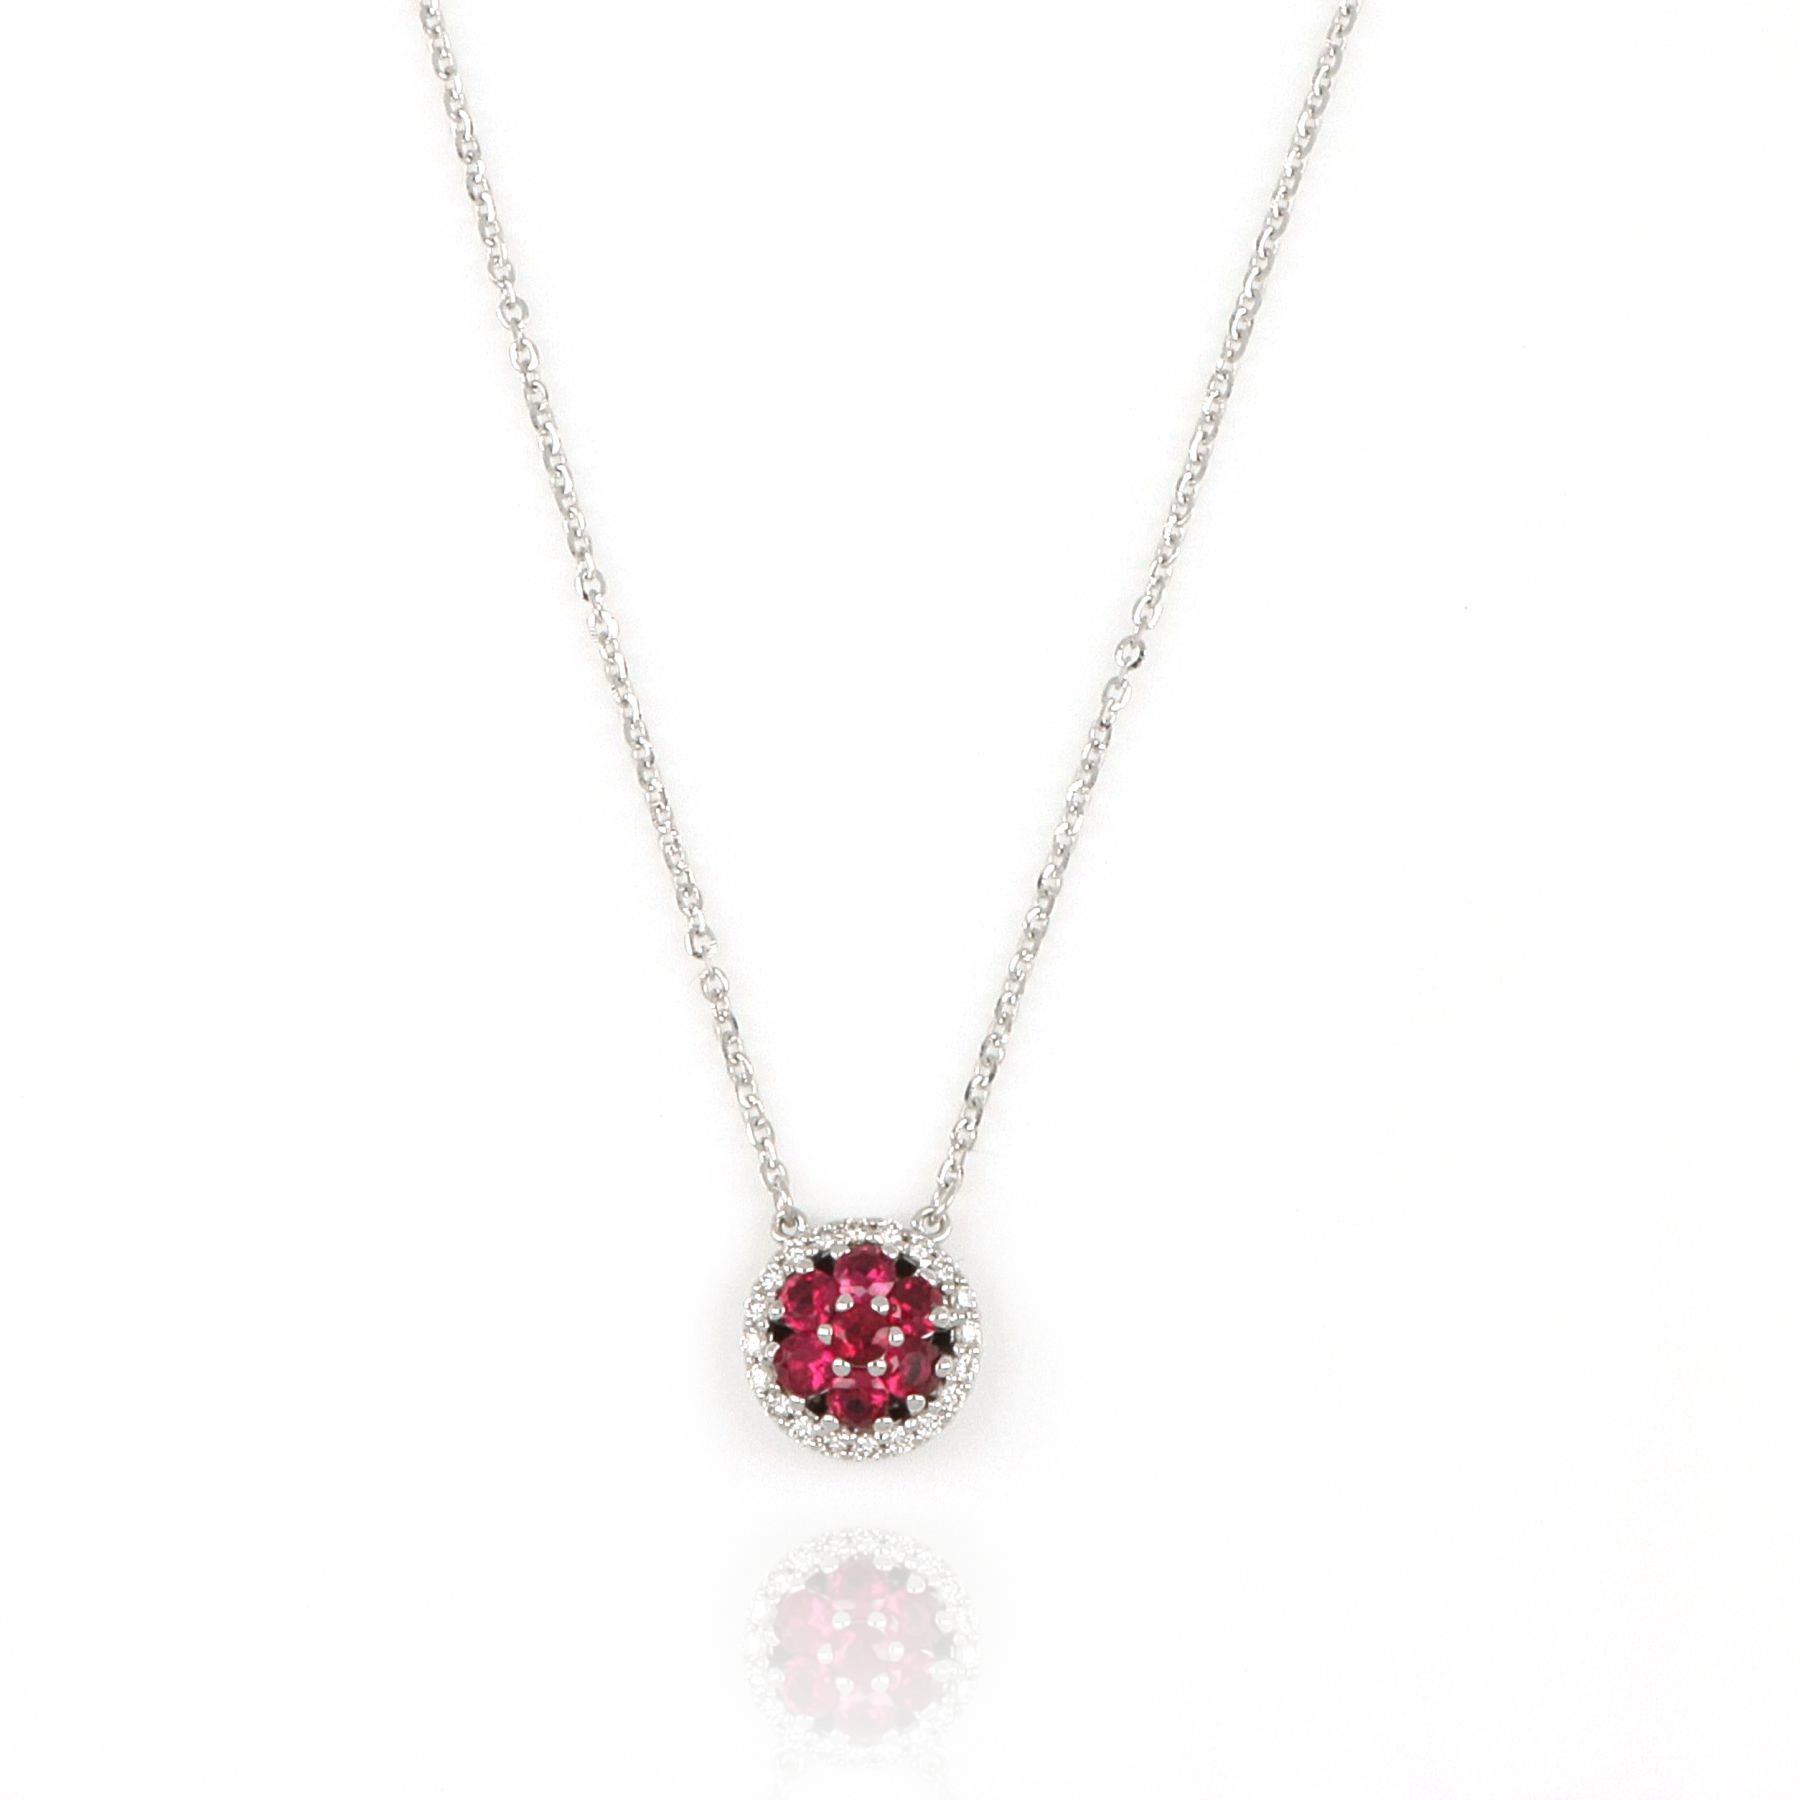 Necklace white gold with rubies and diamonds - GOLD ART